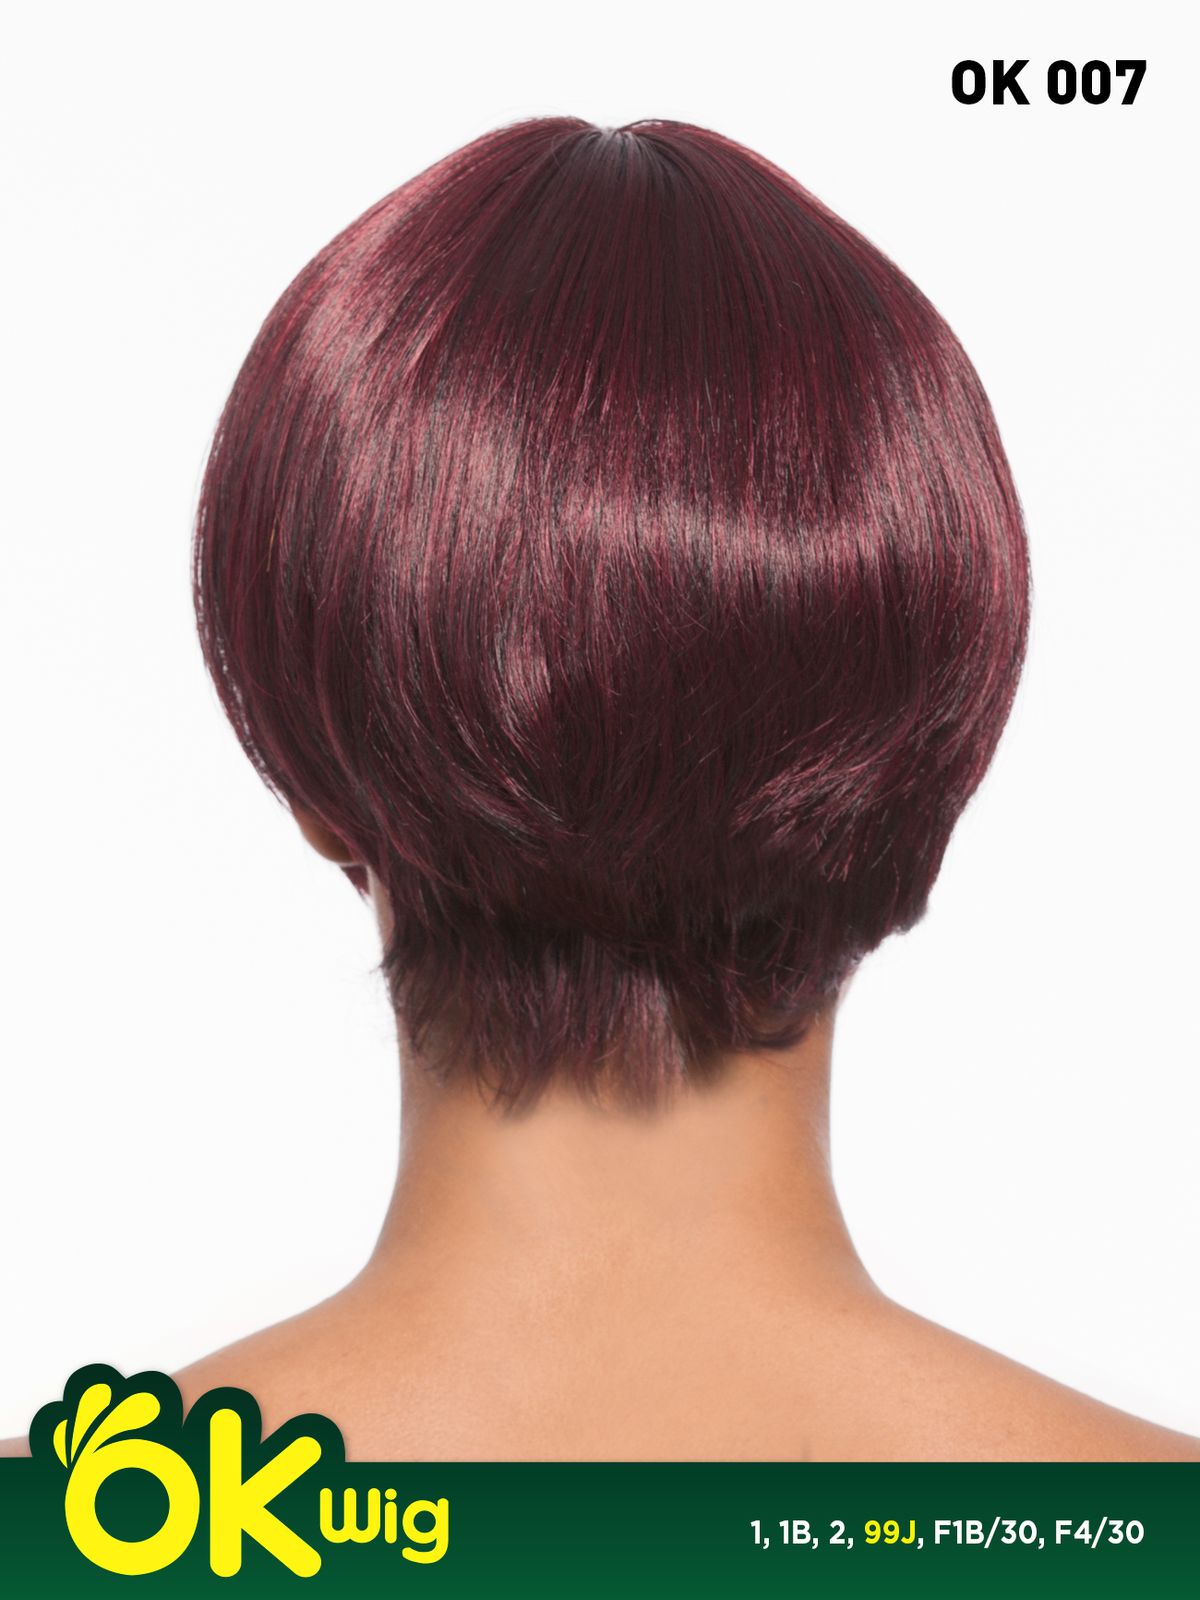 Hair Topic Soft & Natural Synthetic Wig OK 007